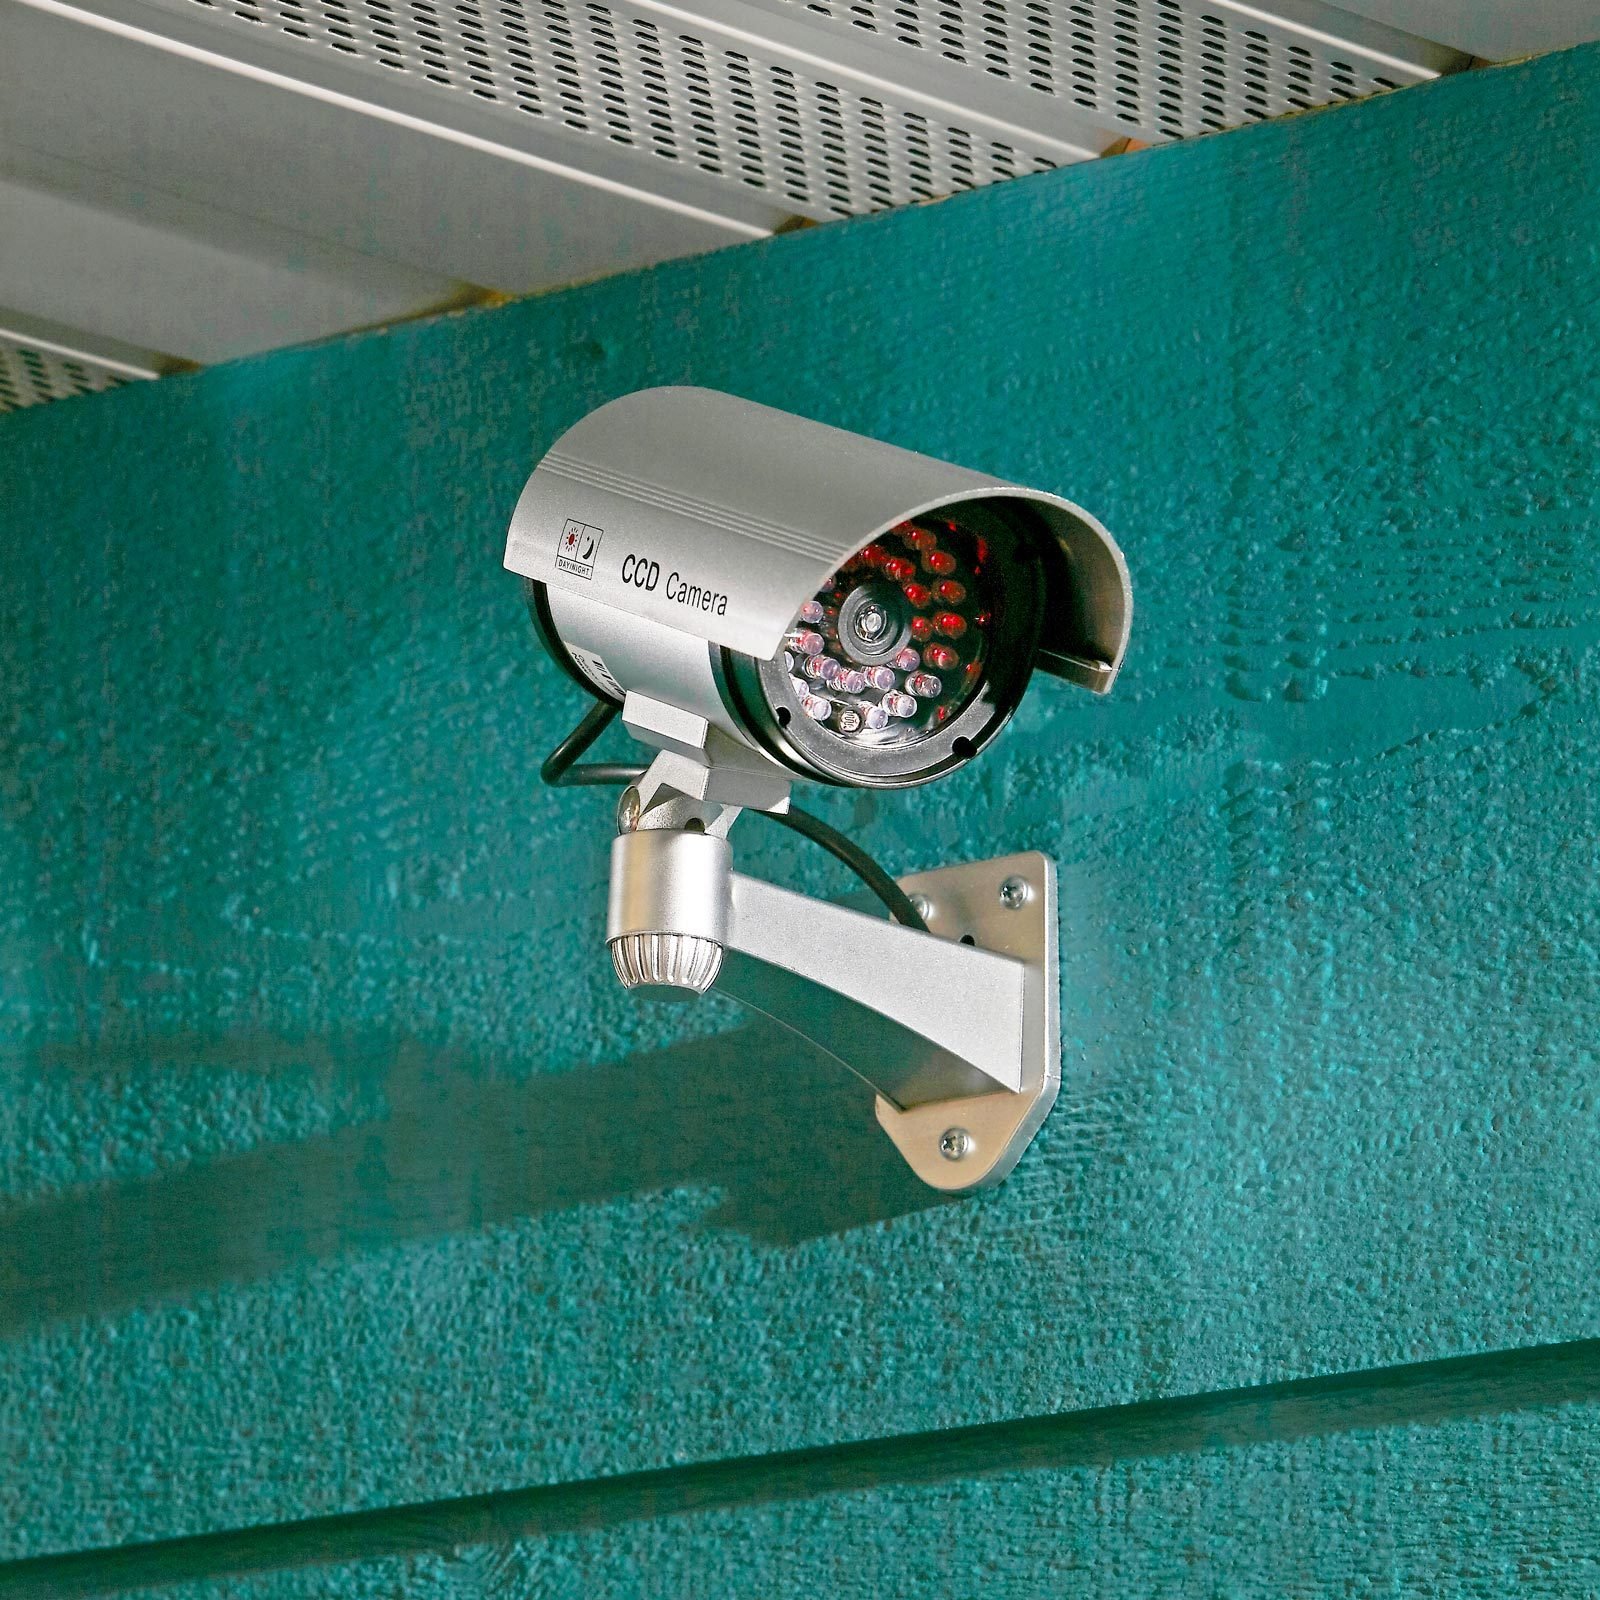 Home Security Camera Installation: What You Need to Know